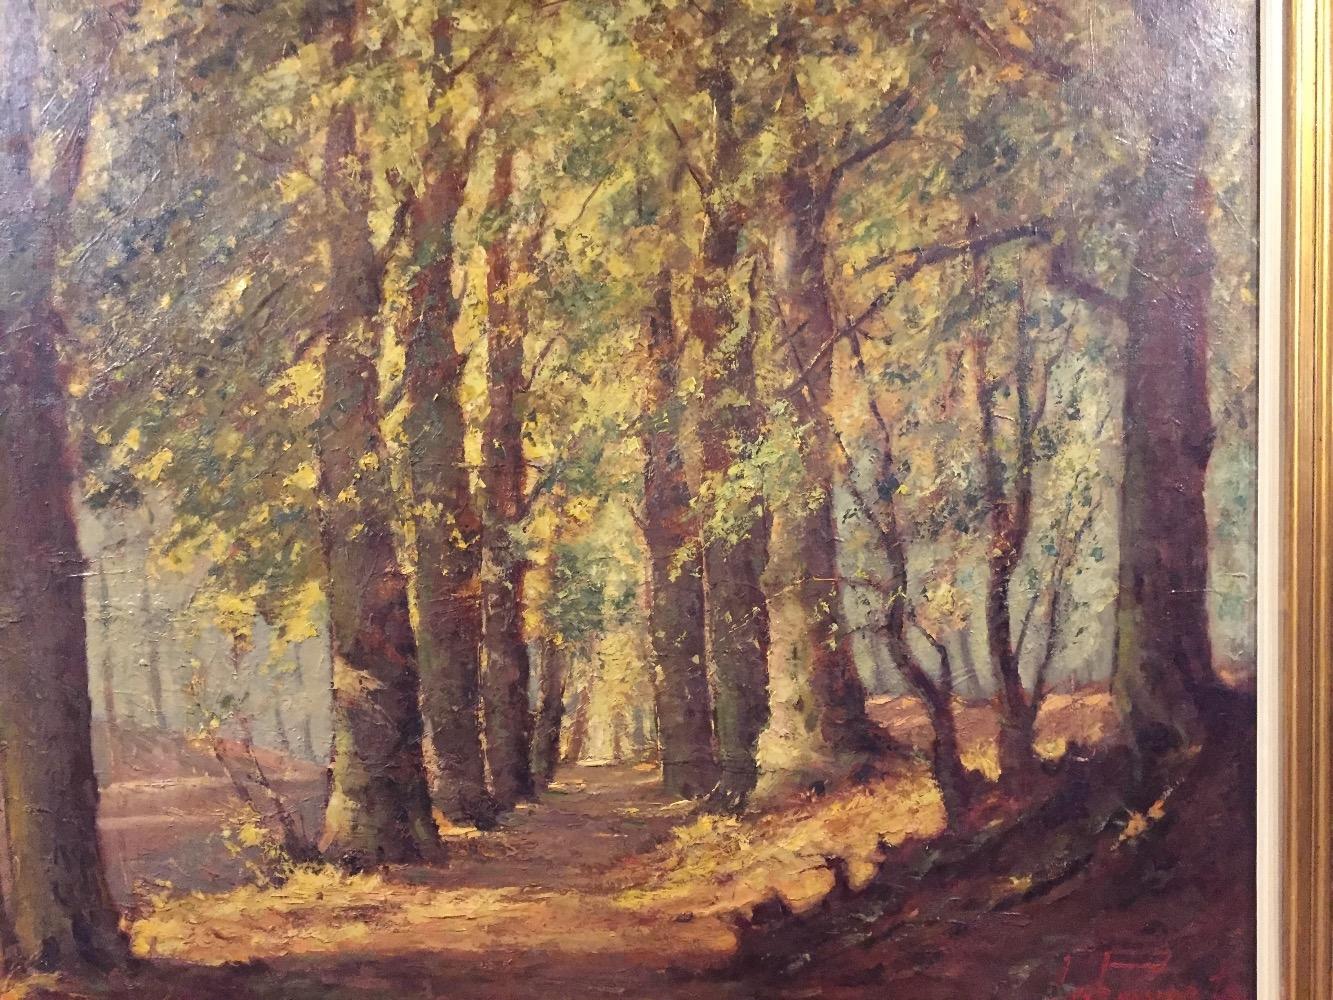 Forest in the summertime